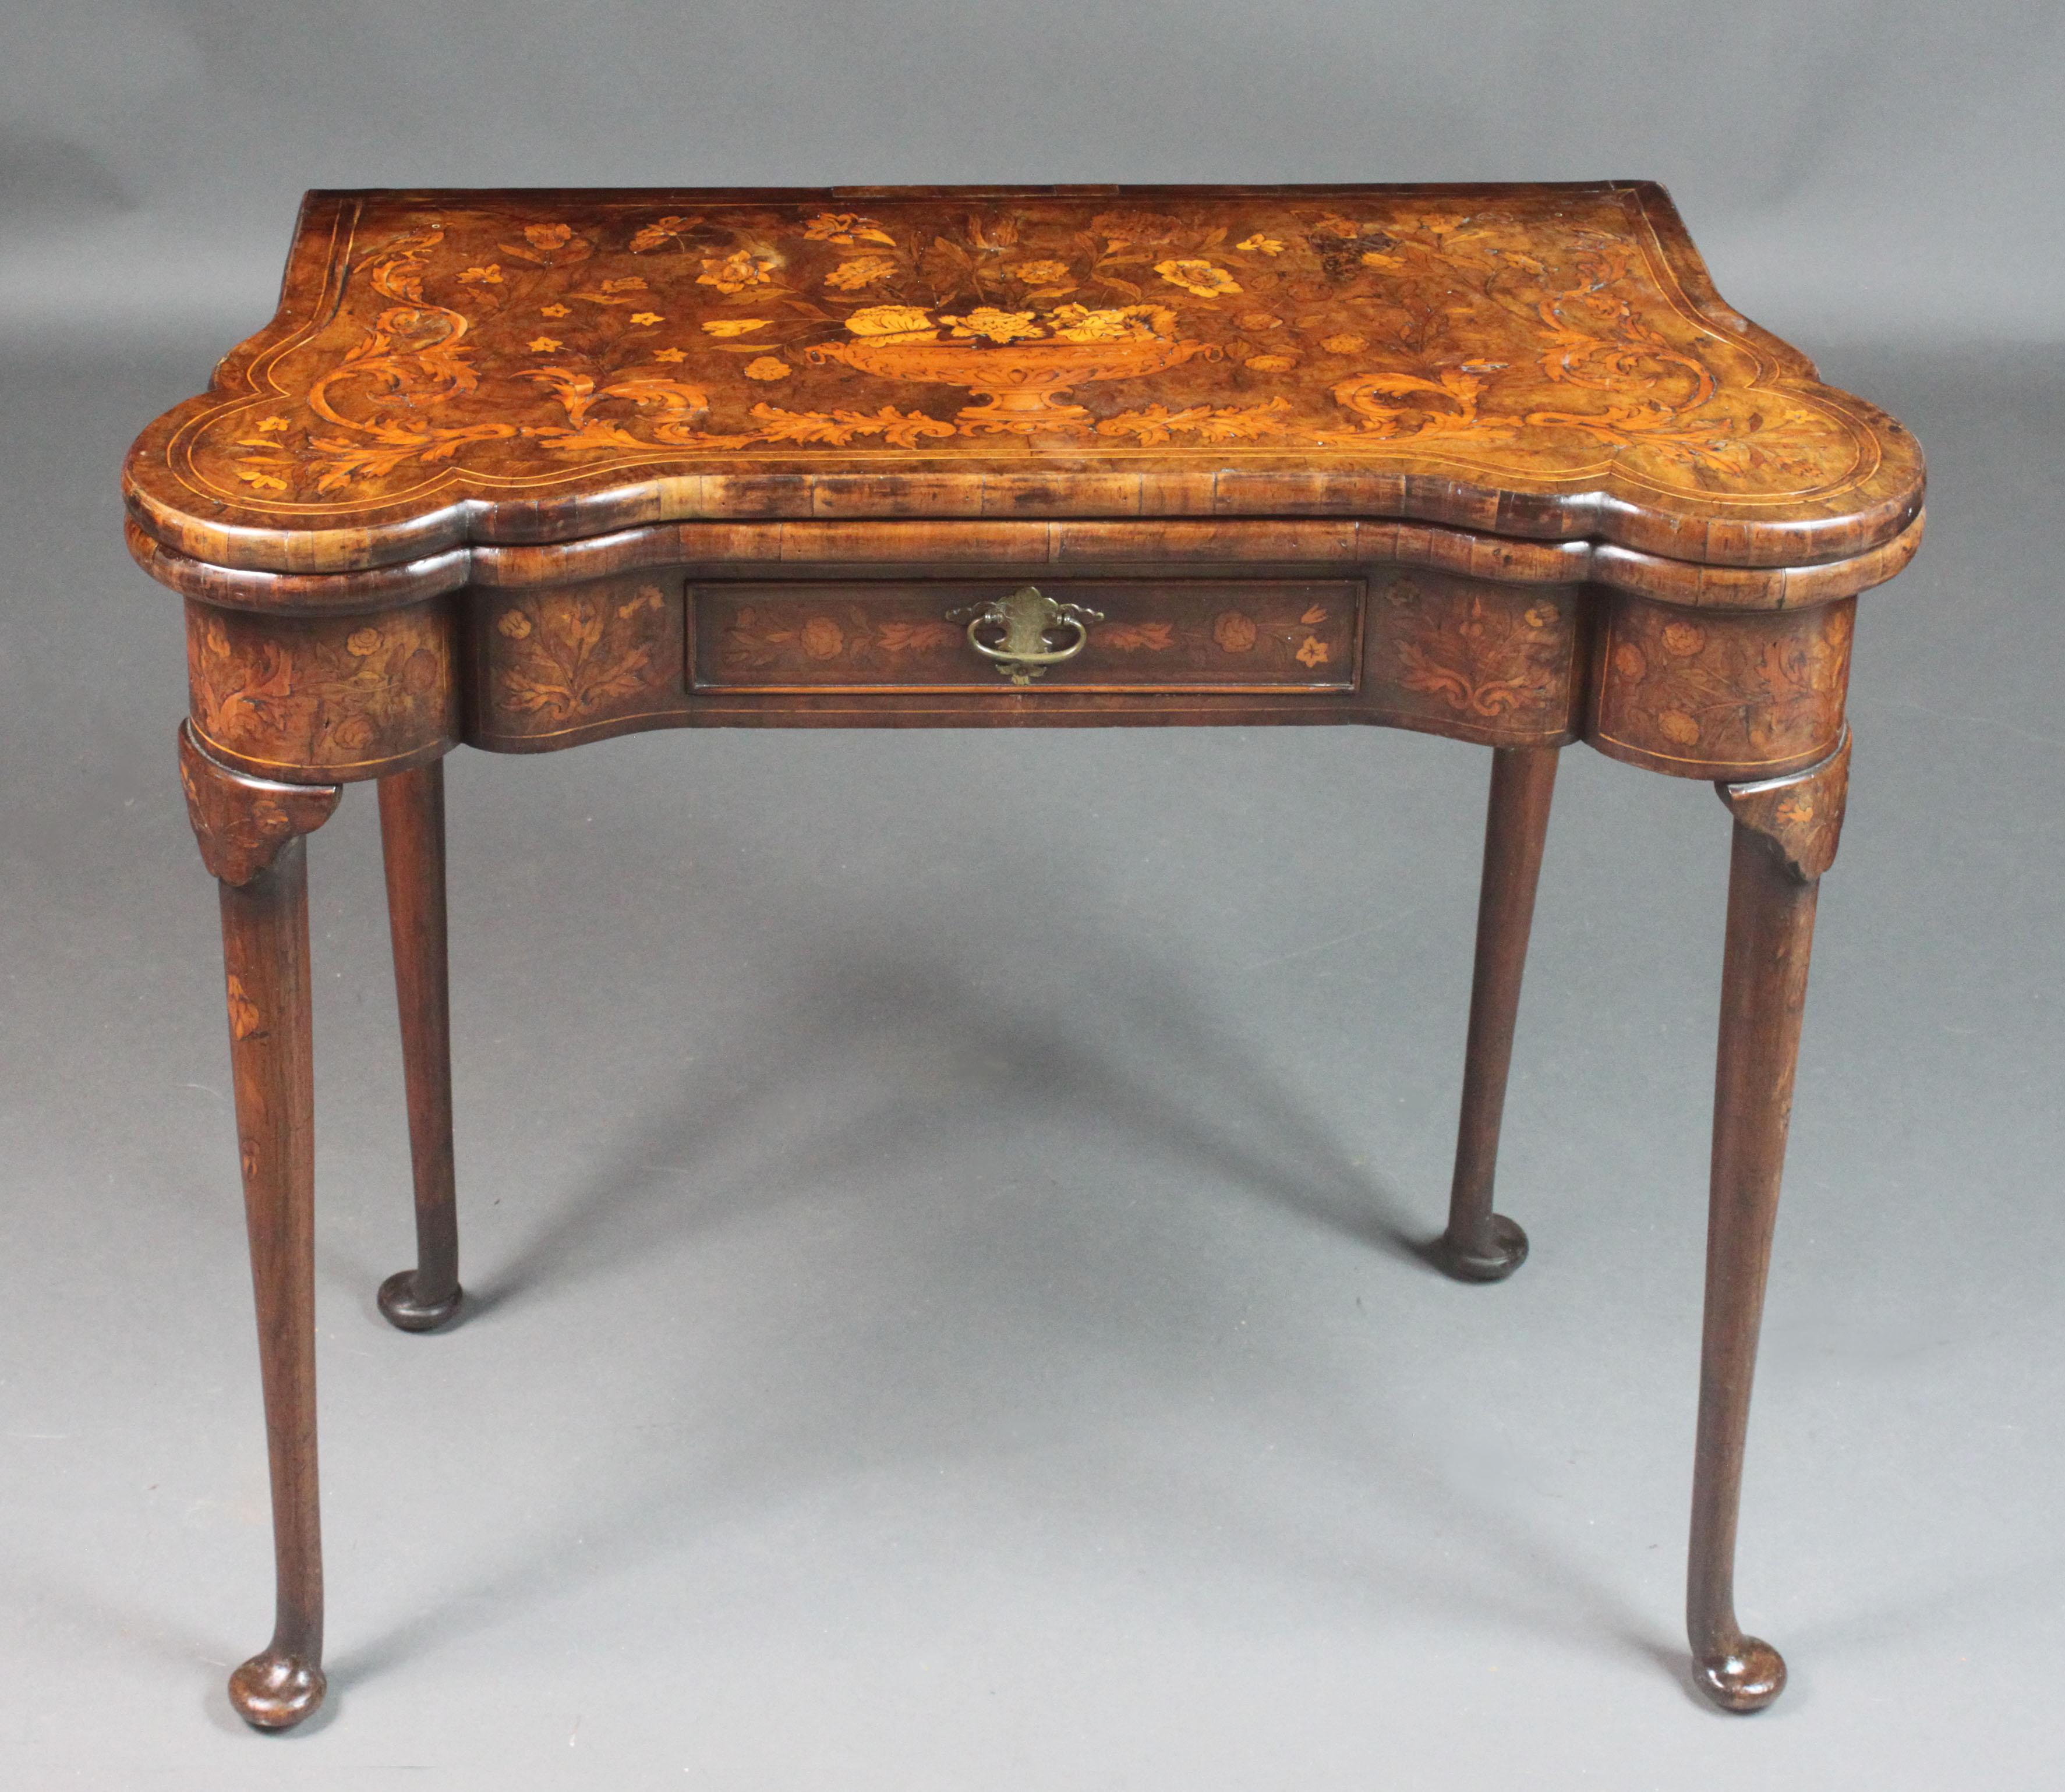 A good Dutch walnut pad foot card table with attractive marquetry inlay of birds and flowers; both back legs hinge on a knuckle joint to support the table when open, the interior with counter wells and inlaid with the four card suits. Oak-lined